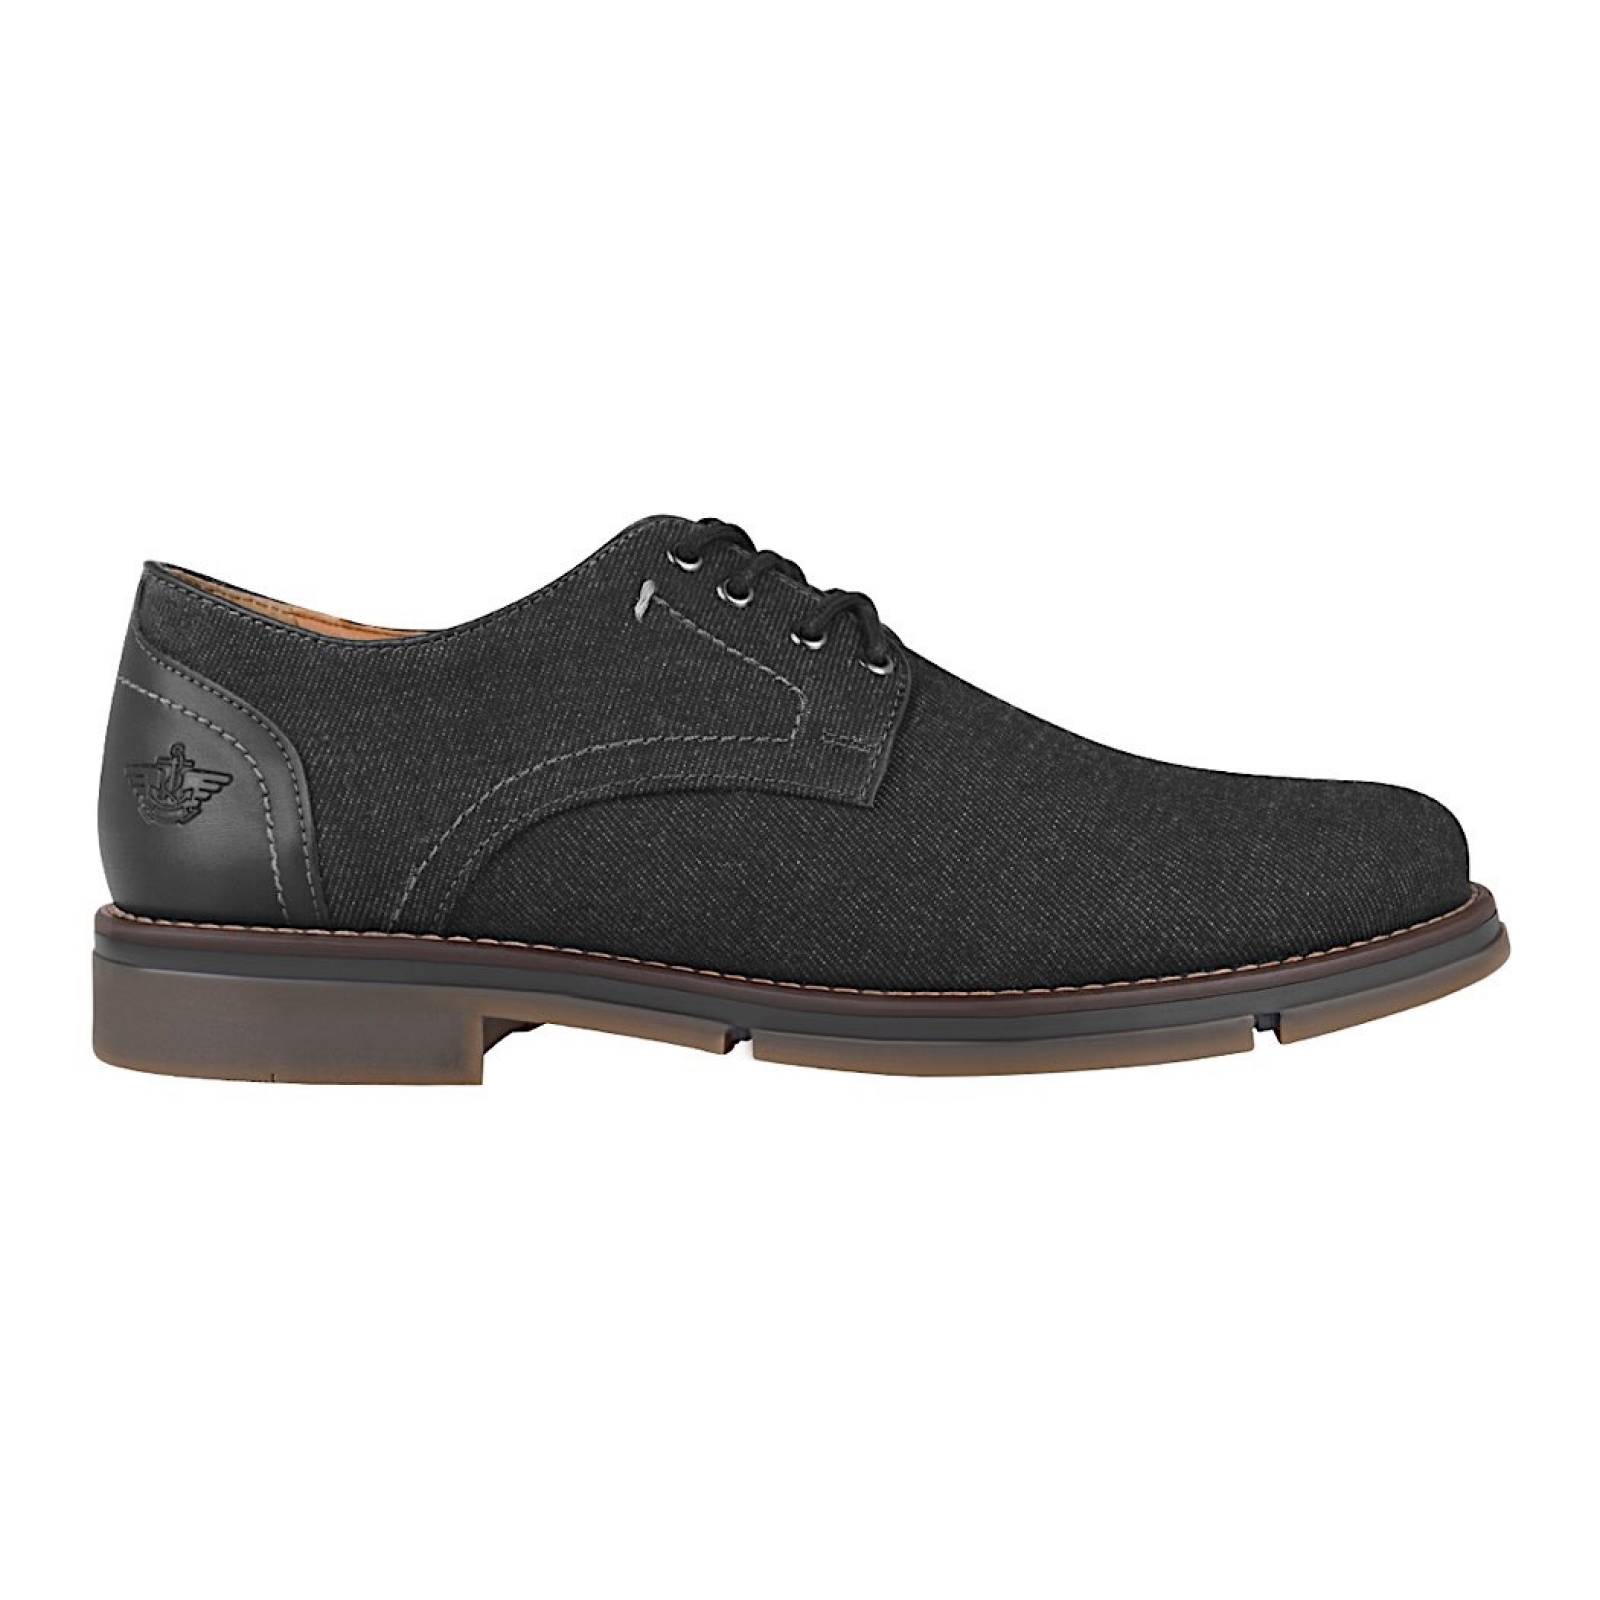 ZAPATOS CASUALES CABALLERO DOCKERS D211721 TEXTIL NEGRO